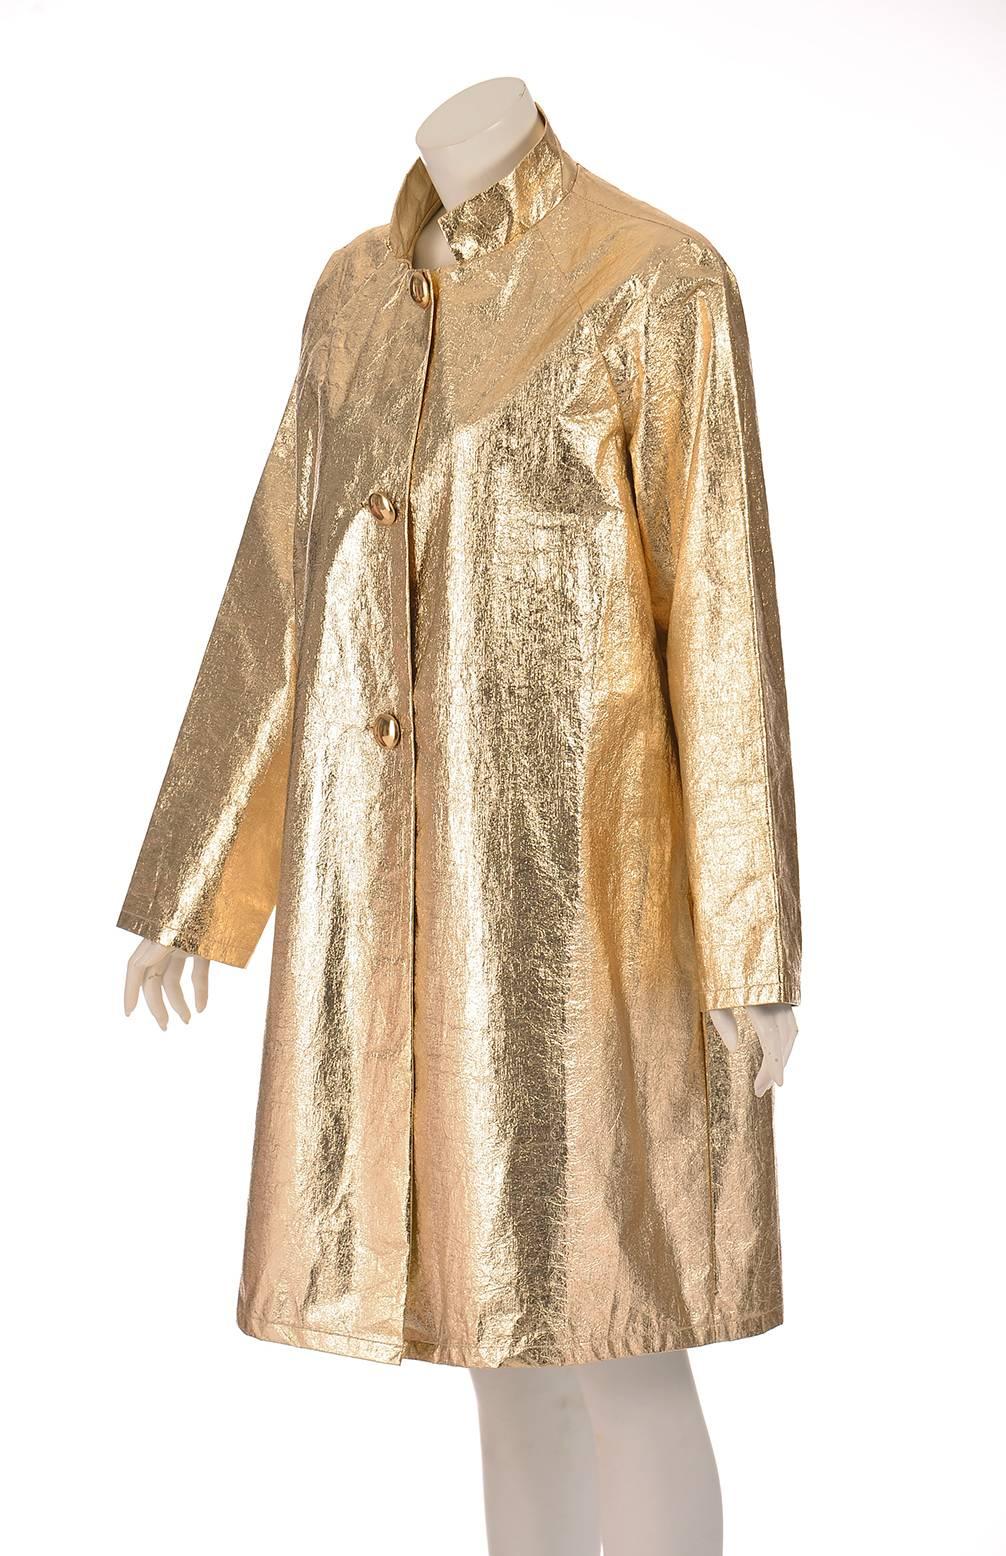 A late 1950s gold coat. This gold foil coat looks as though it were gilded! This fantastic coat is knee length and has three shiny gold buttons running down the front, as well as long sleeves, and a stylish high vintage collar. The interior of the